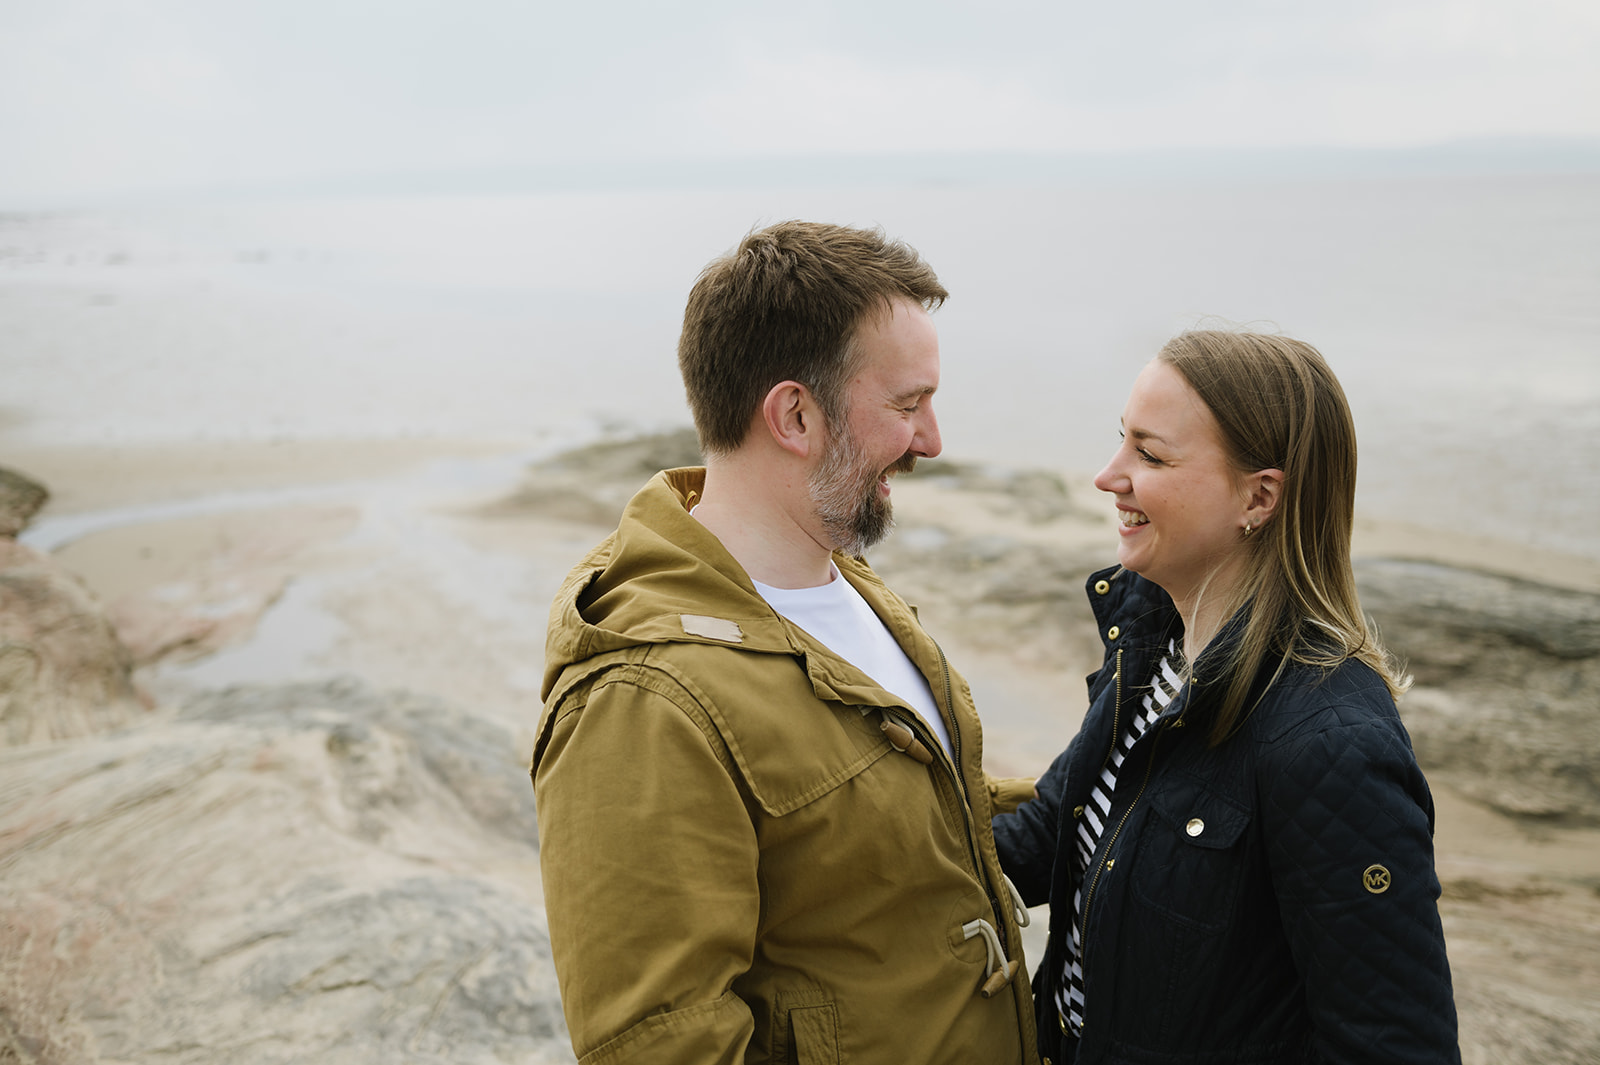 couple facing each other smiling, they're wearing coats with a beach blurred in the background